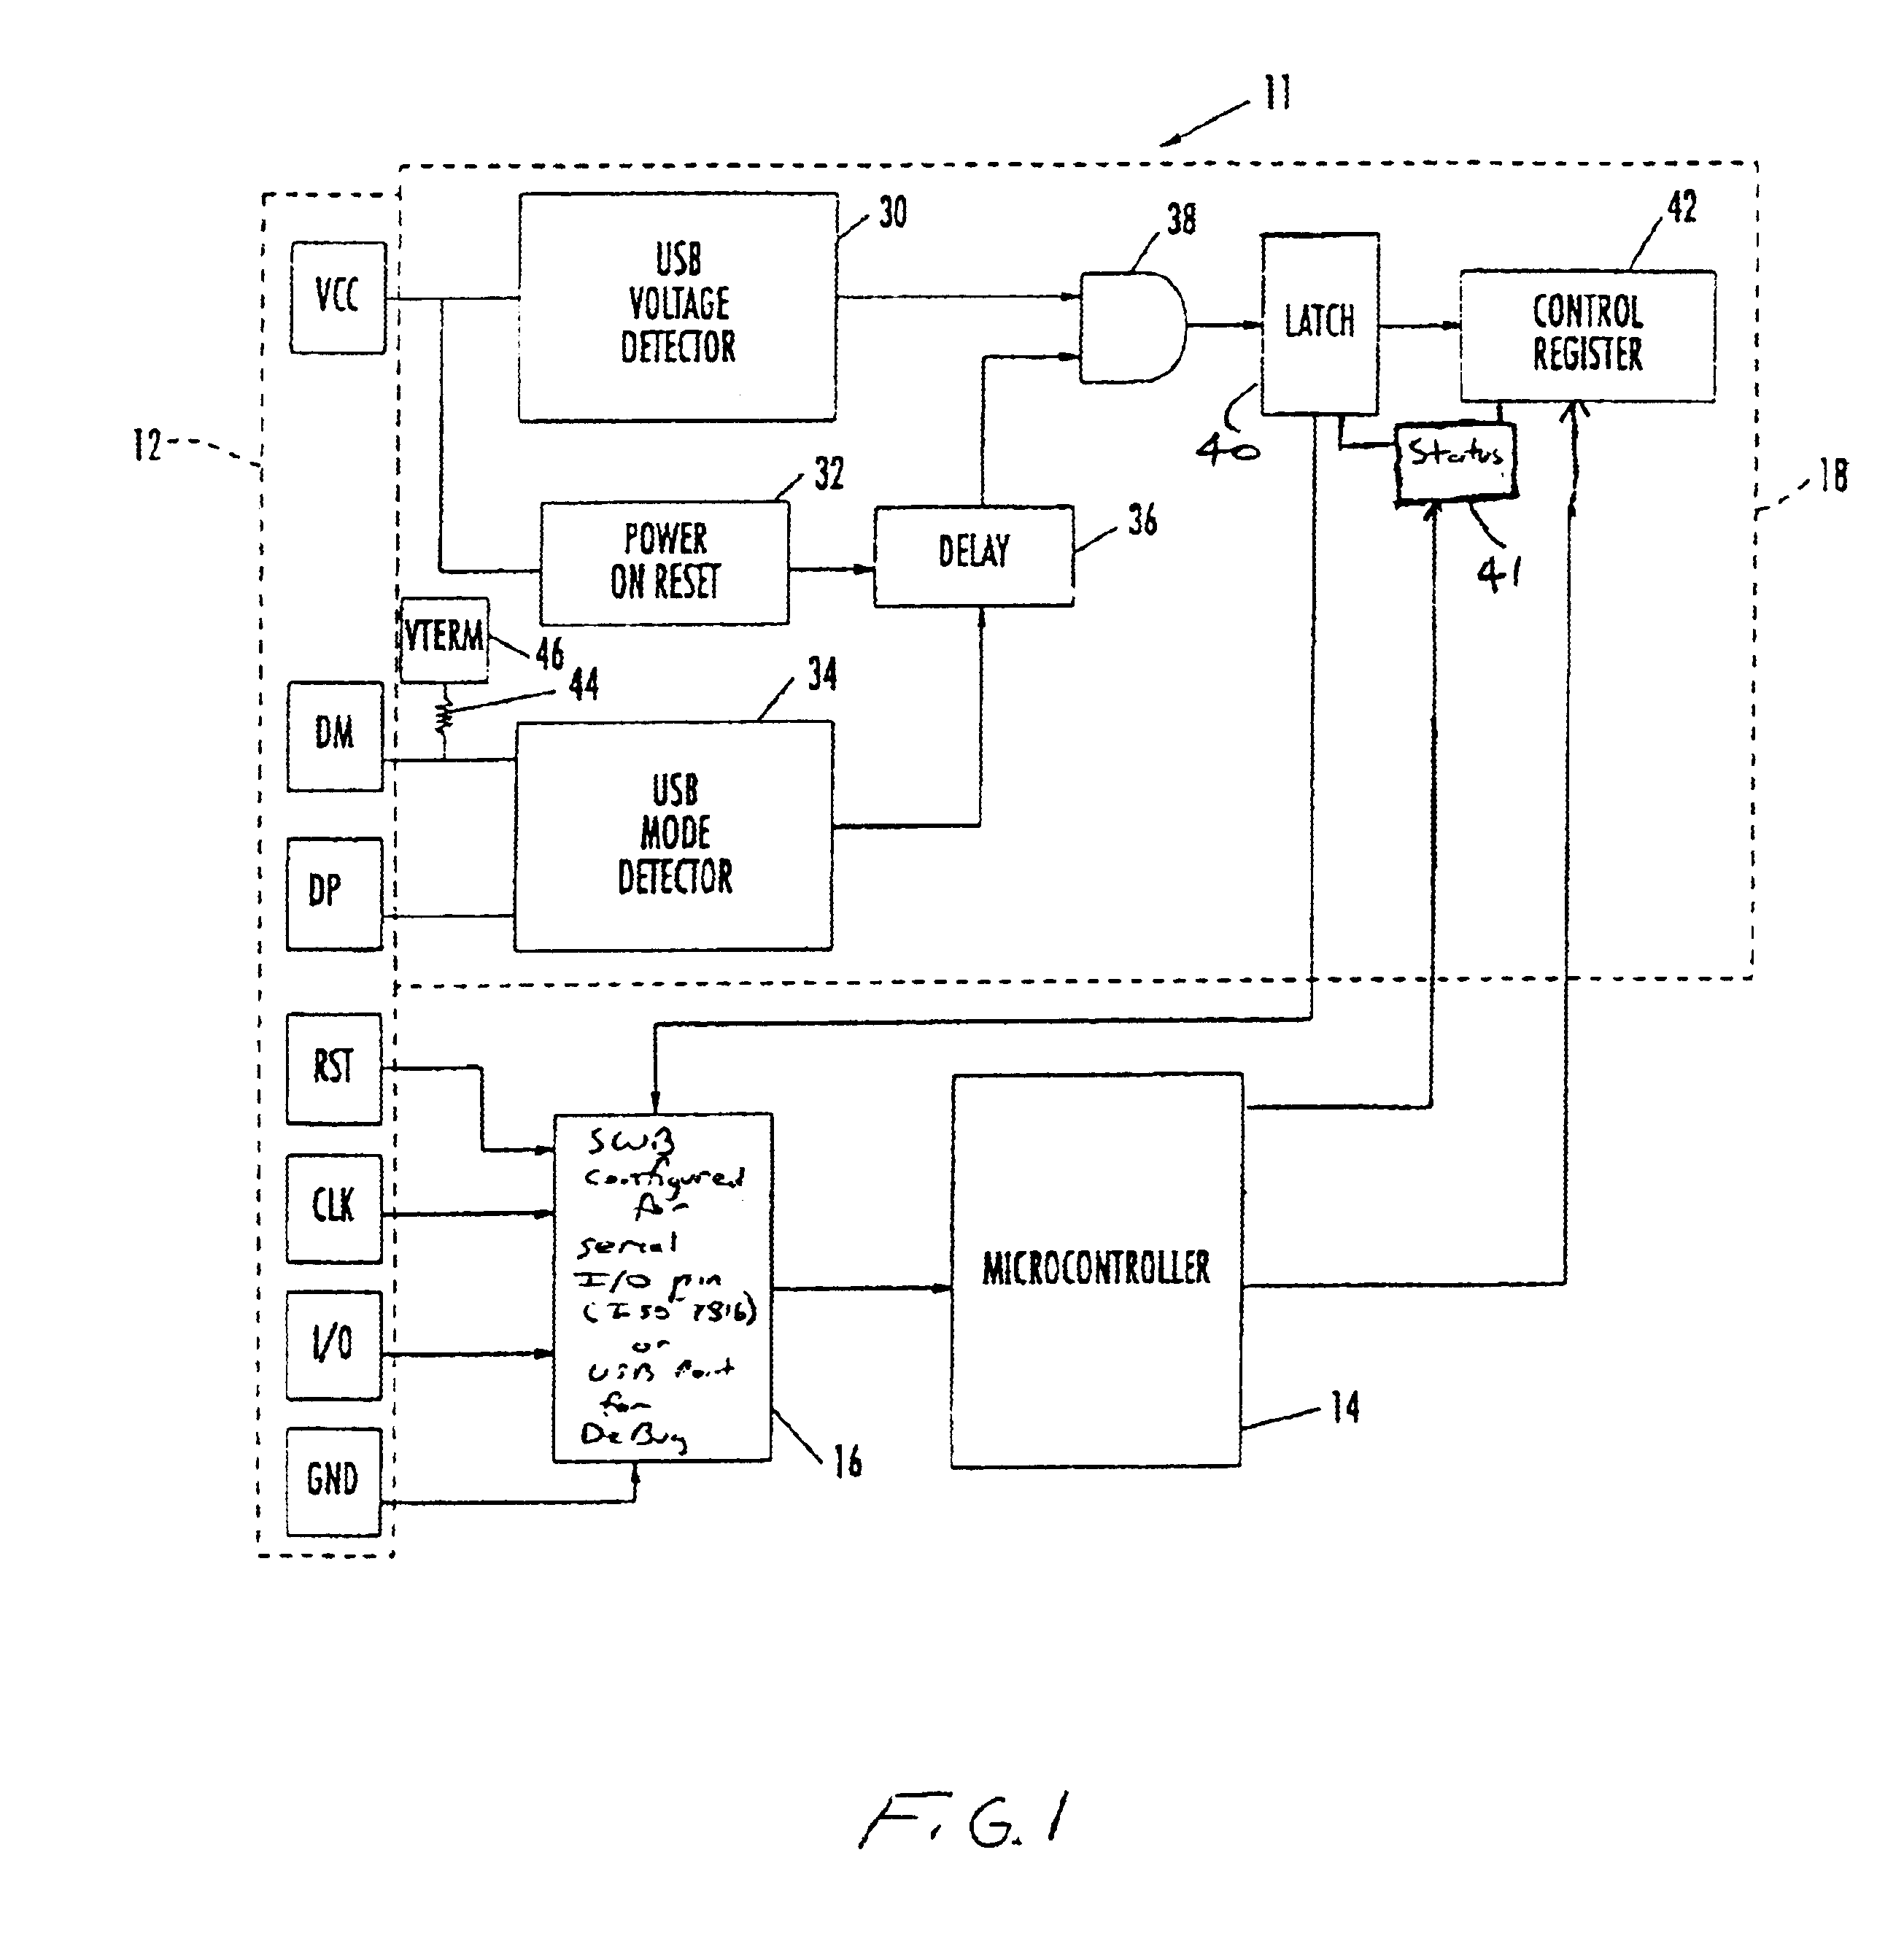 Smart card that can be configured for debugging and software development using secondary communication port